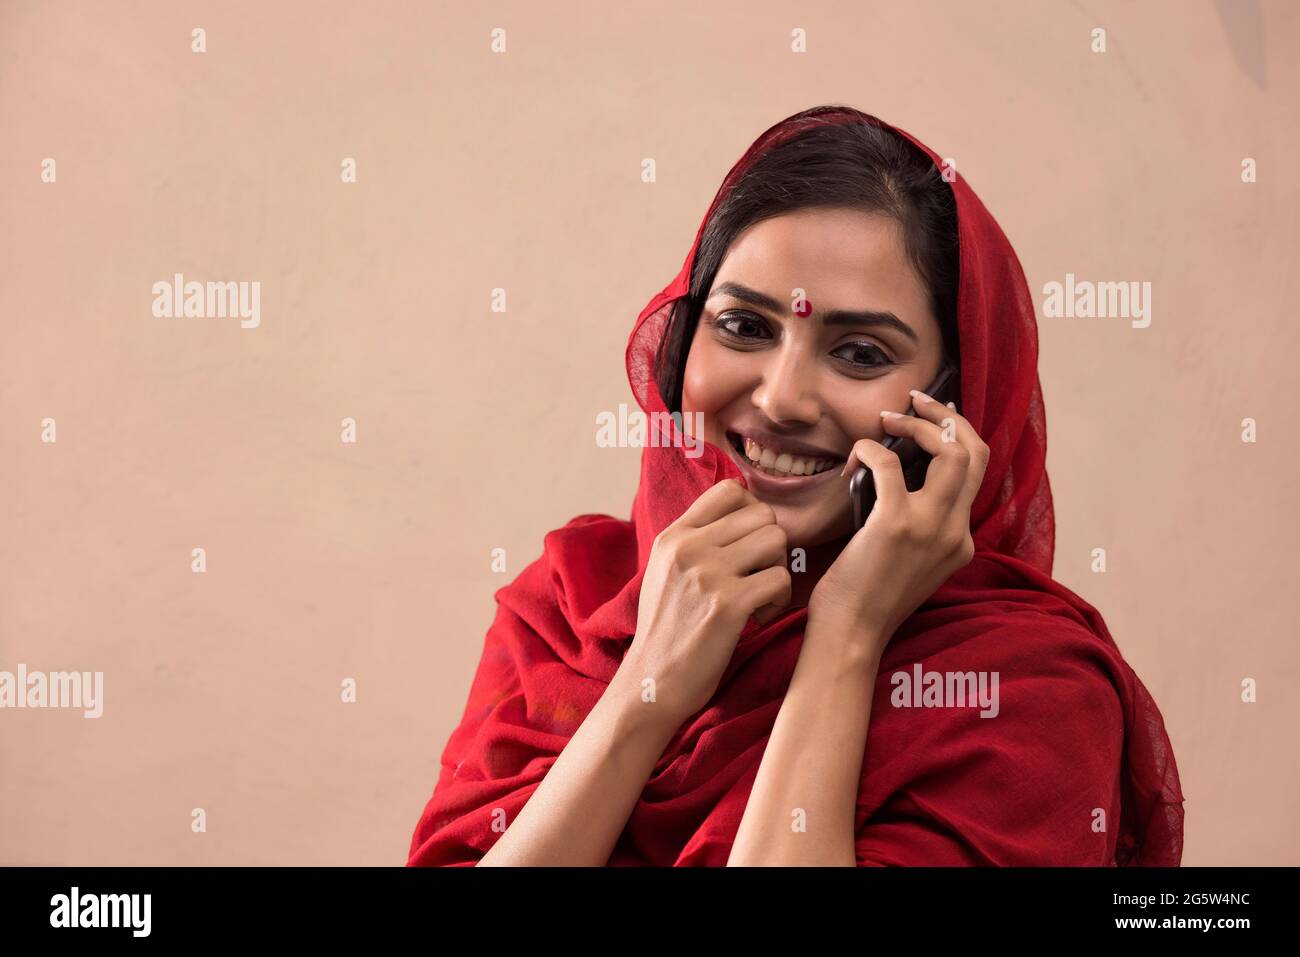 Portrait of a woman talking on her mobile phone. Stock Photo